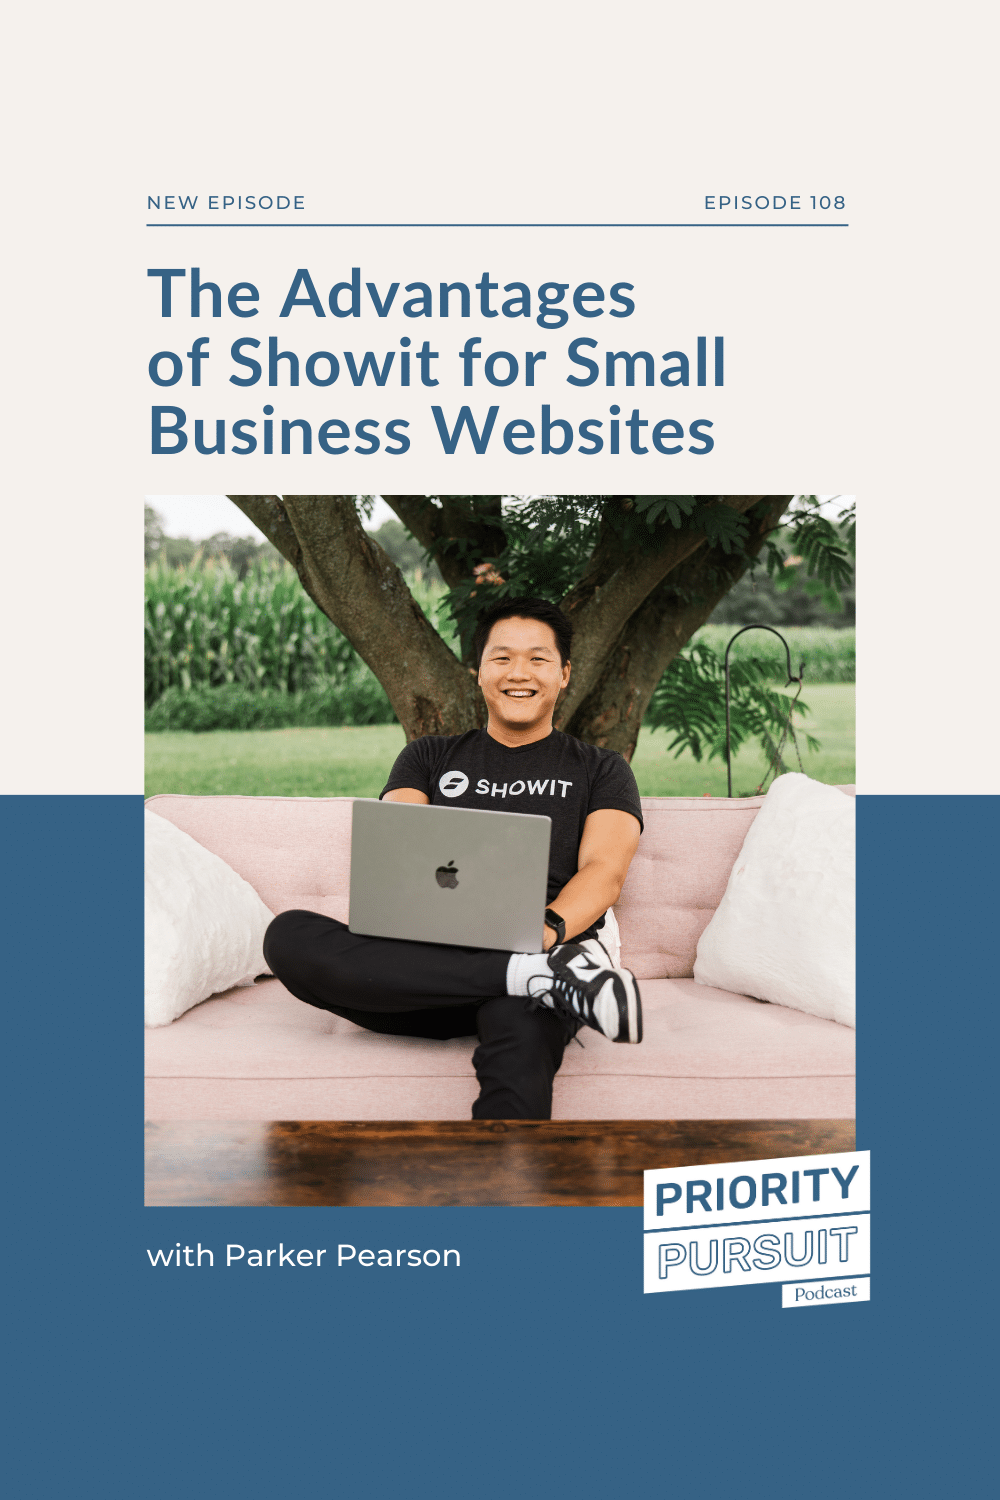 Learn about the advantages of Showit for small business websites as we chat with Parker Pearson!